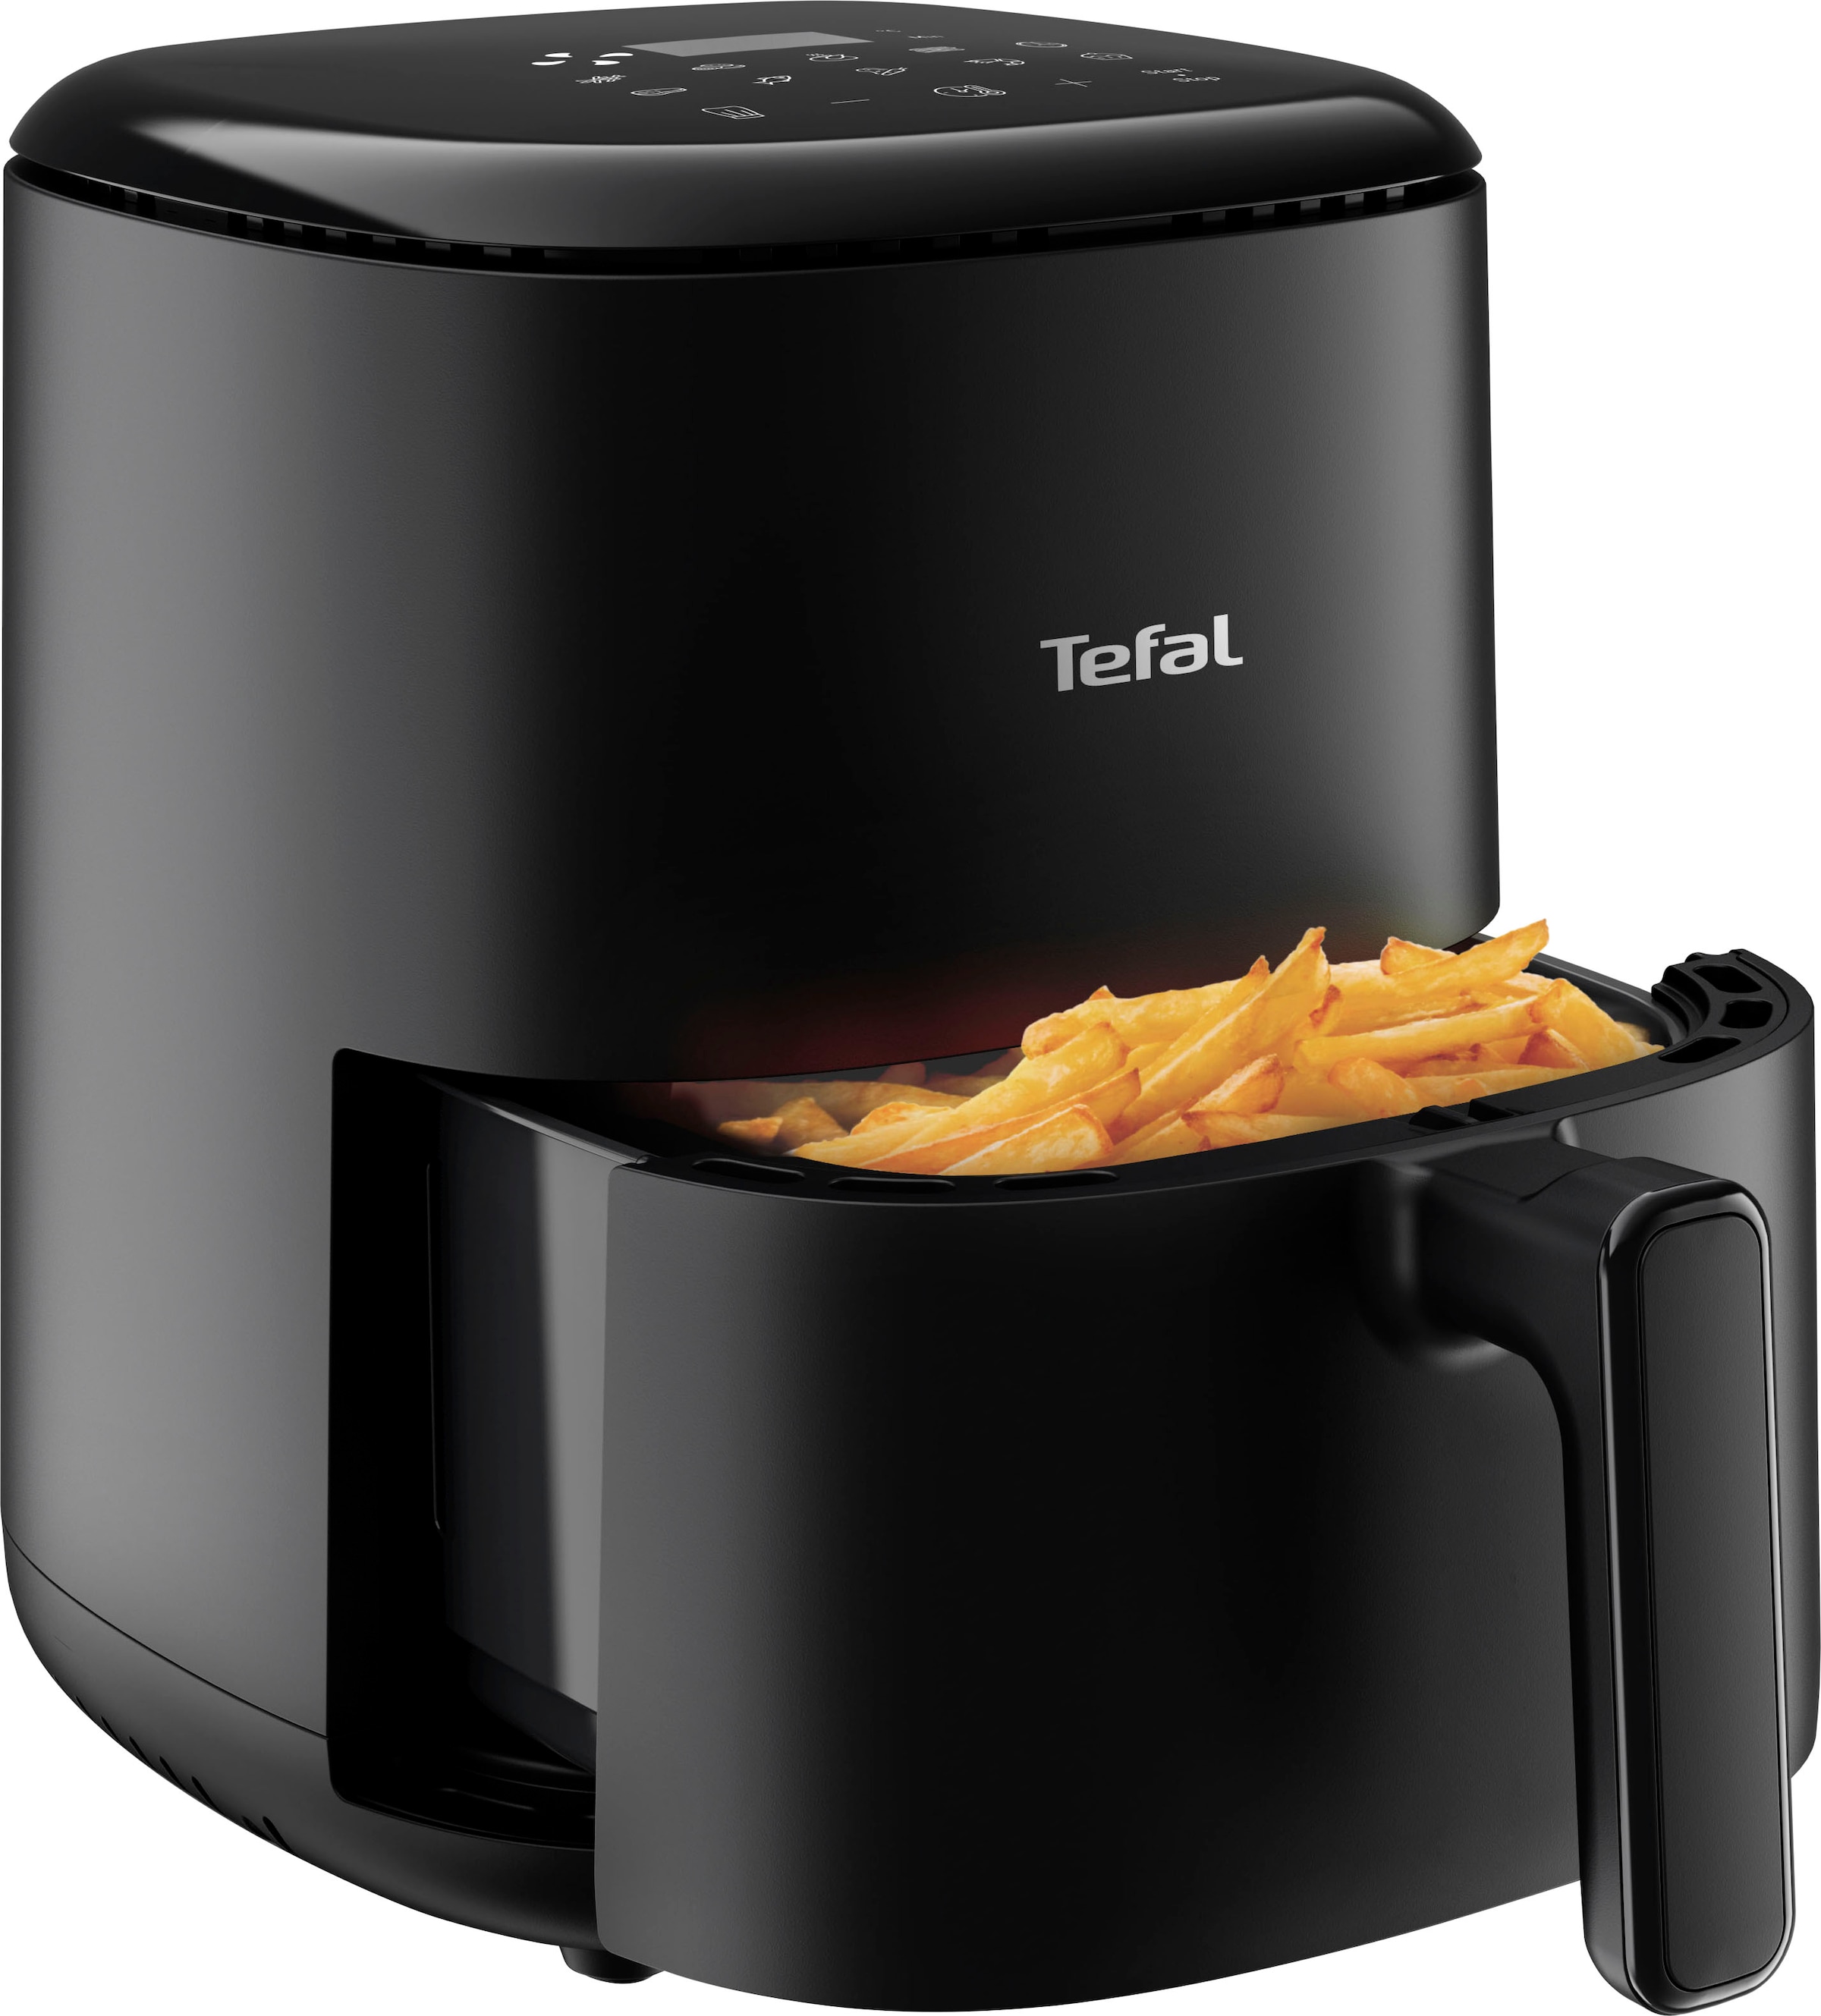 Easy Compact«, »EY1458 Online Heißluftfritteuse W im Shop Fry OTTO 1300 Tefal